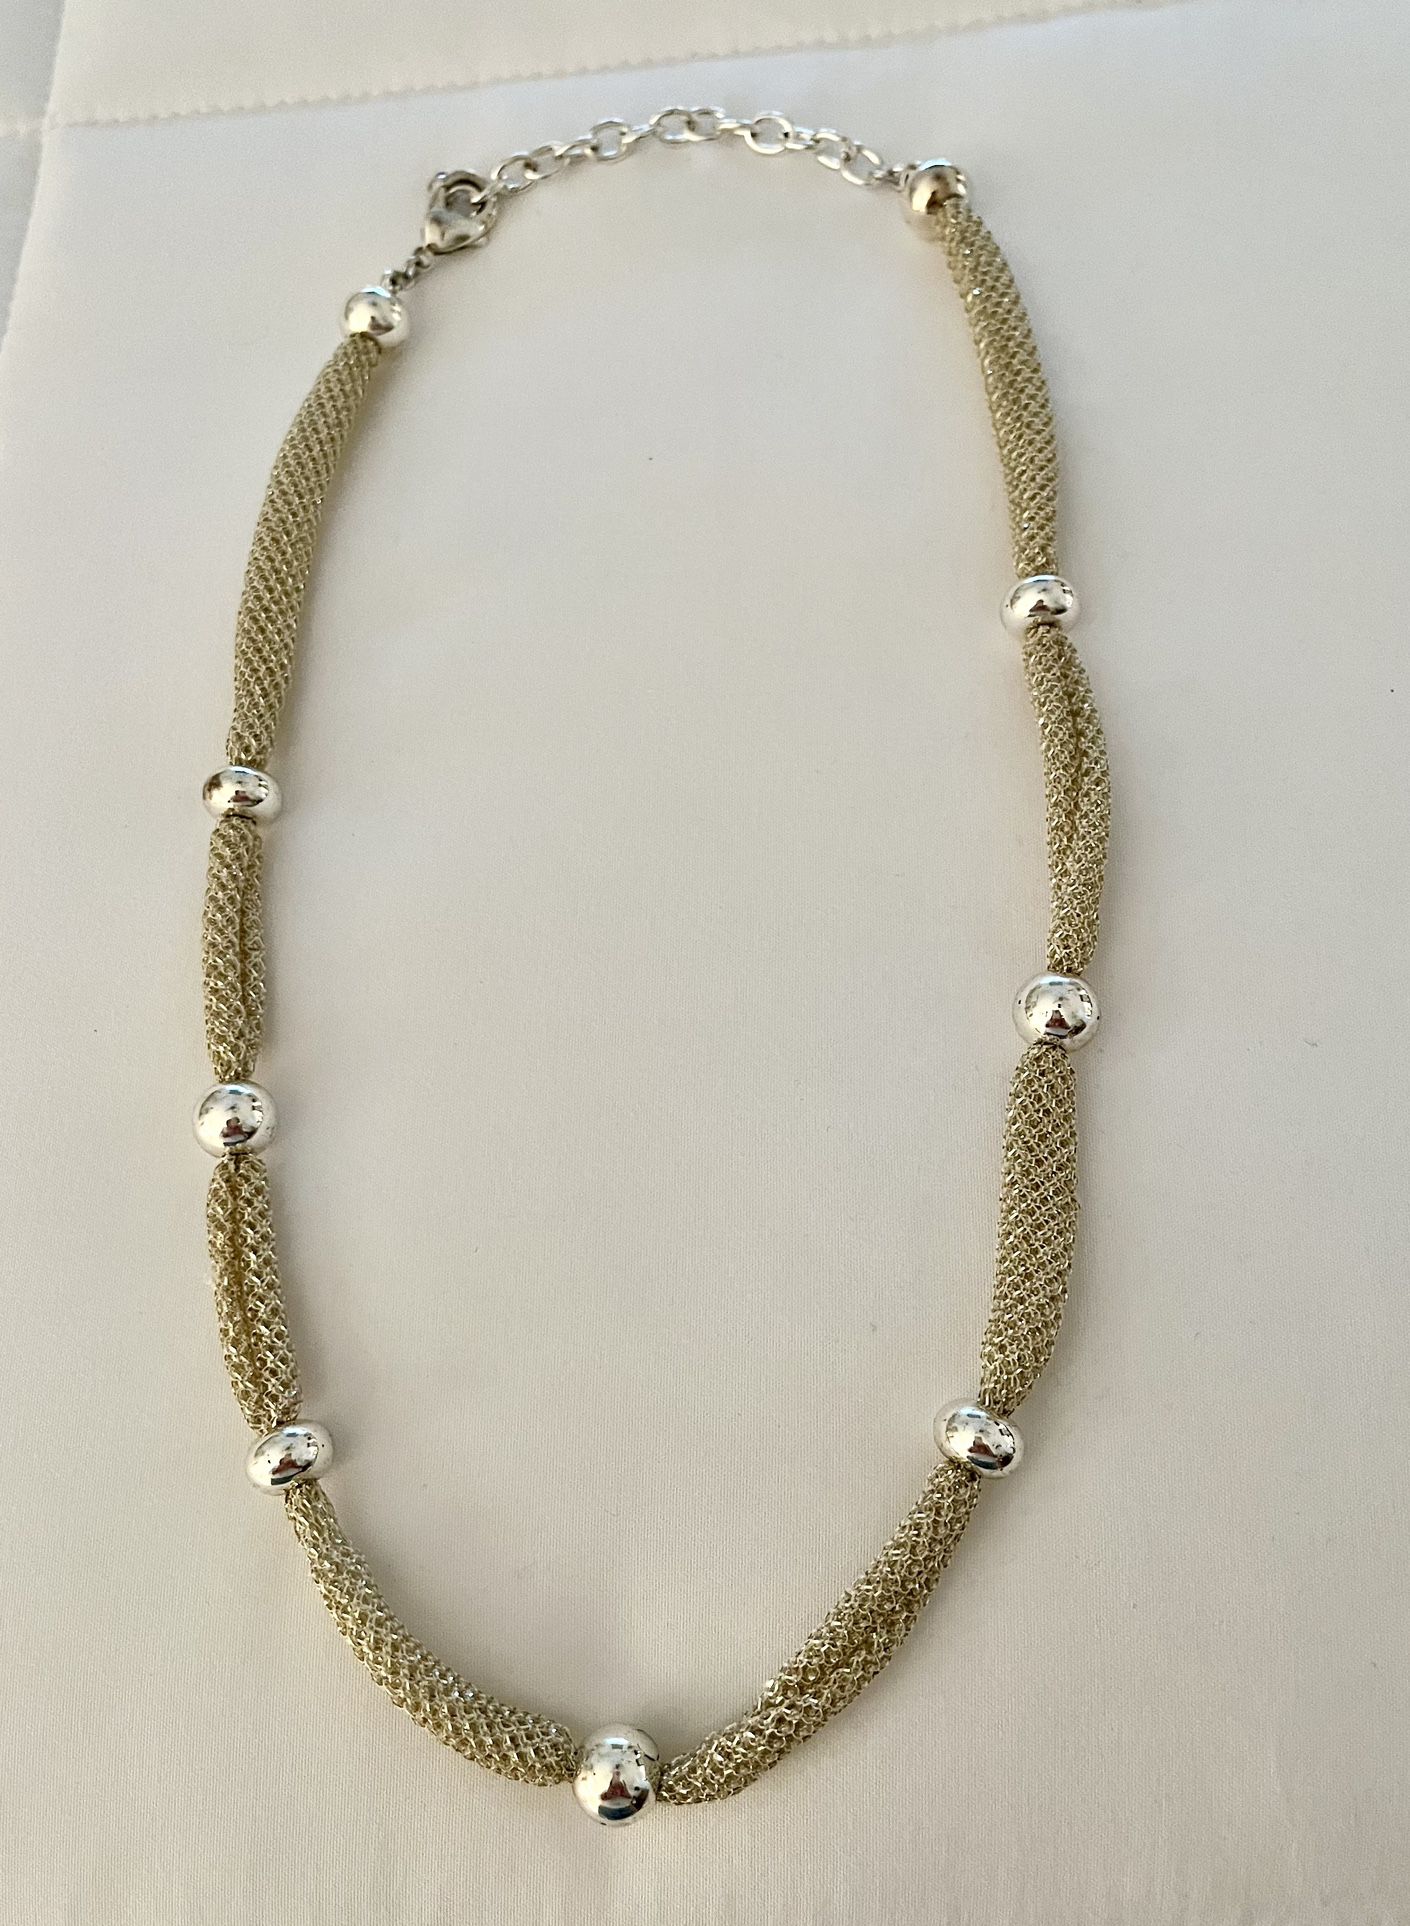 Fashion Necklace Silver Mesh And Beads